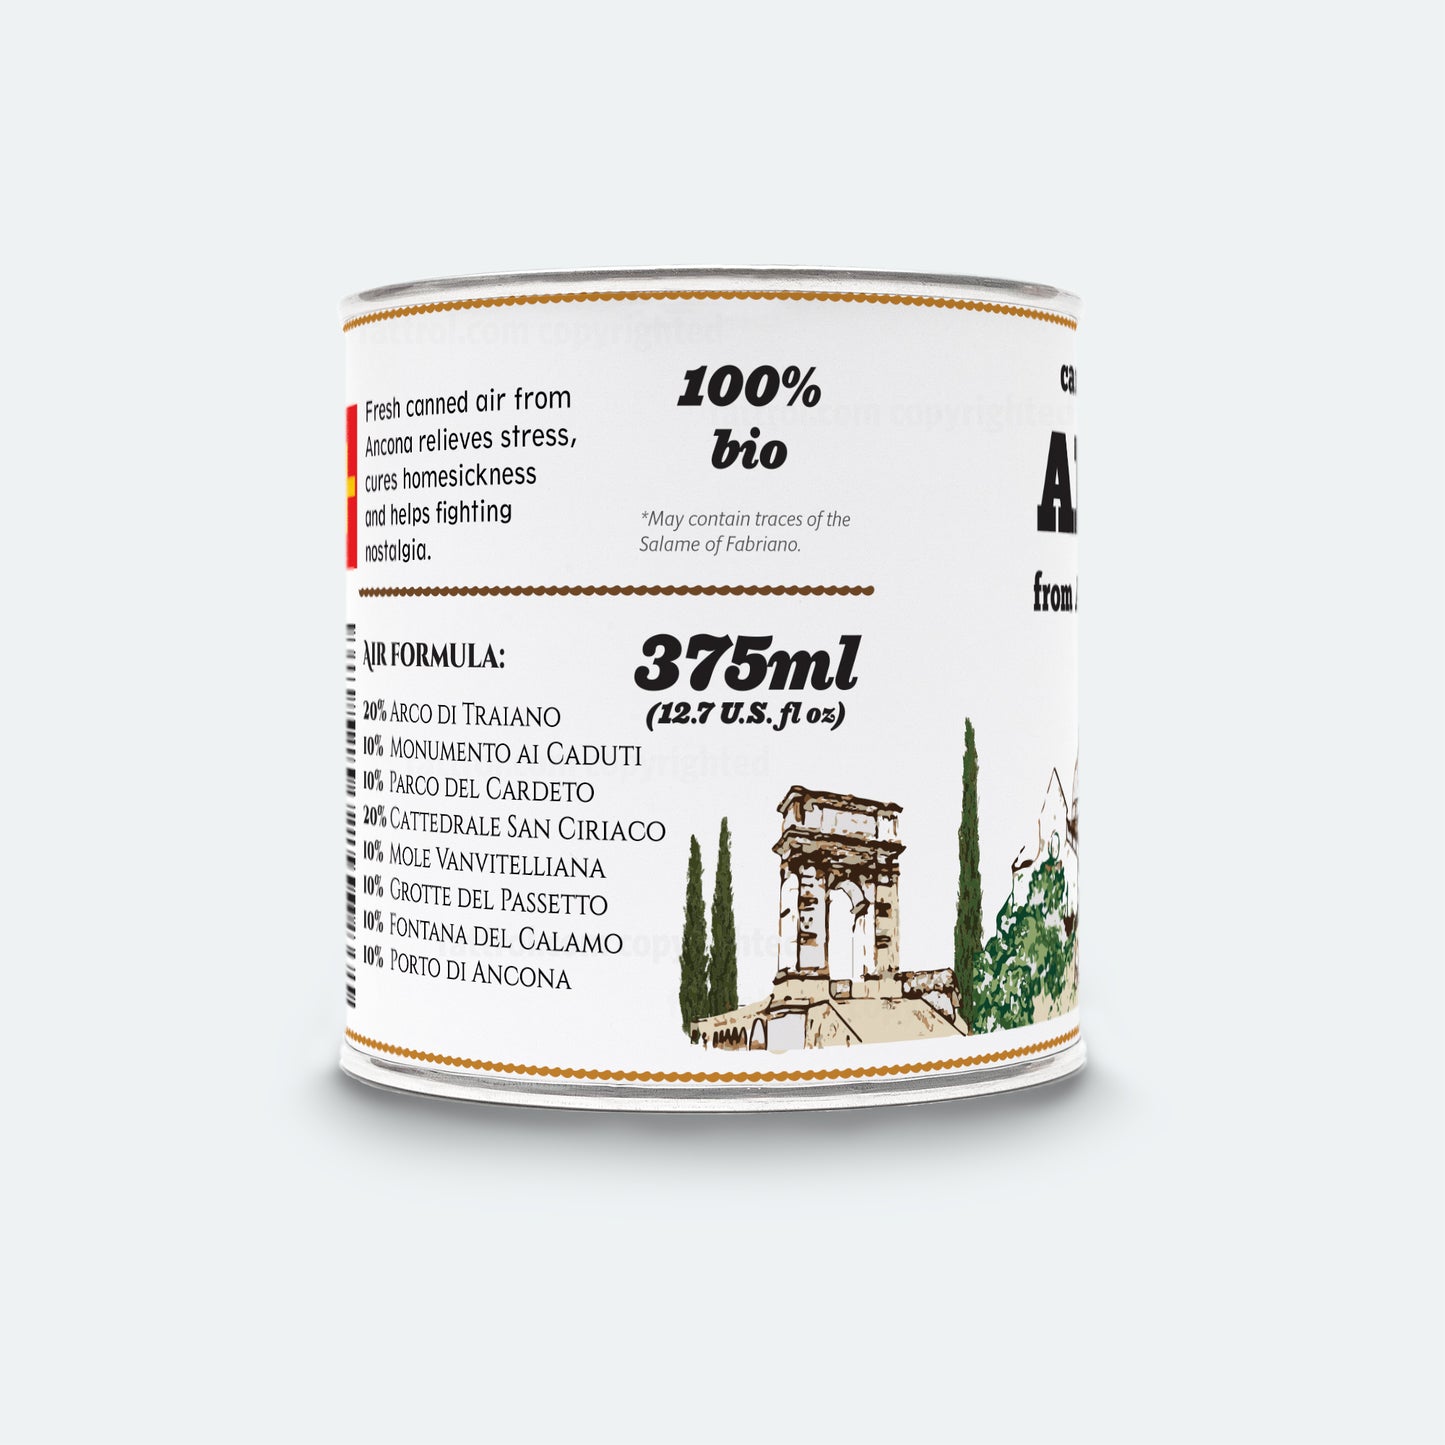 Original Canned Air From Ancona, Italy